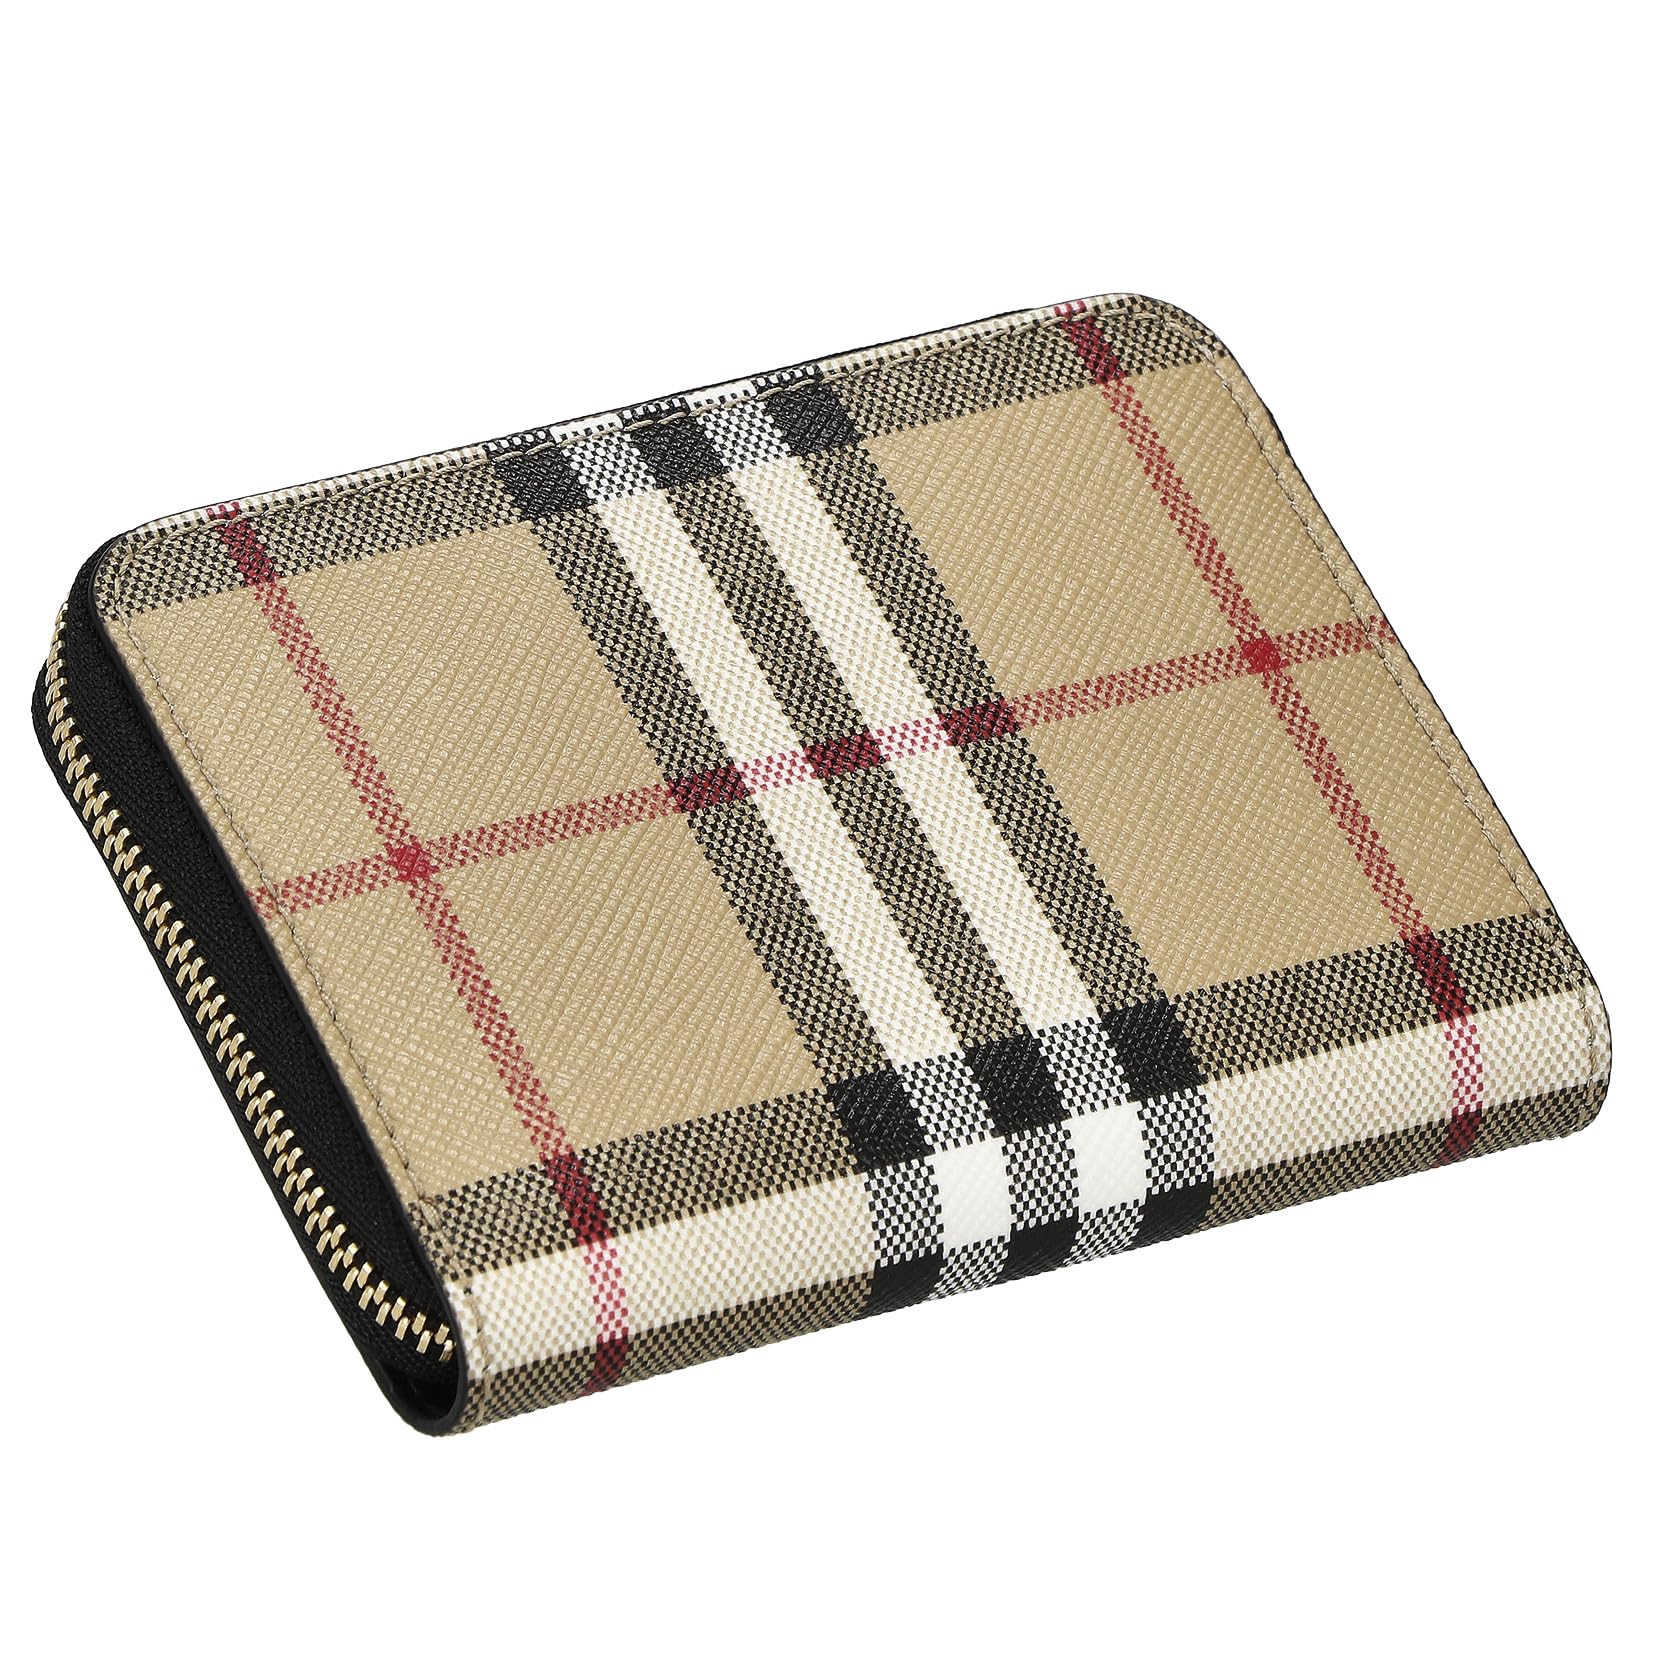 Burberry 8058017 A1189 Coin Purse, A1189, One Size